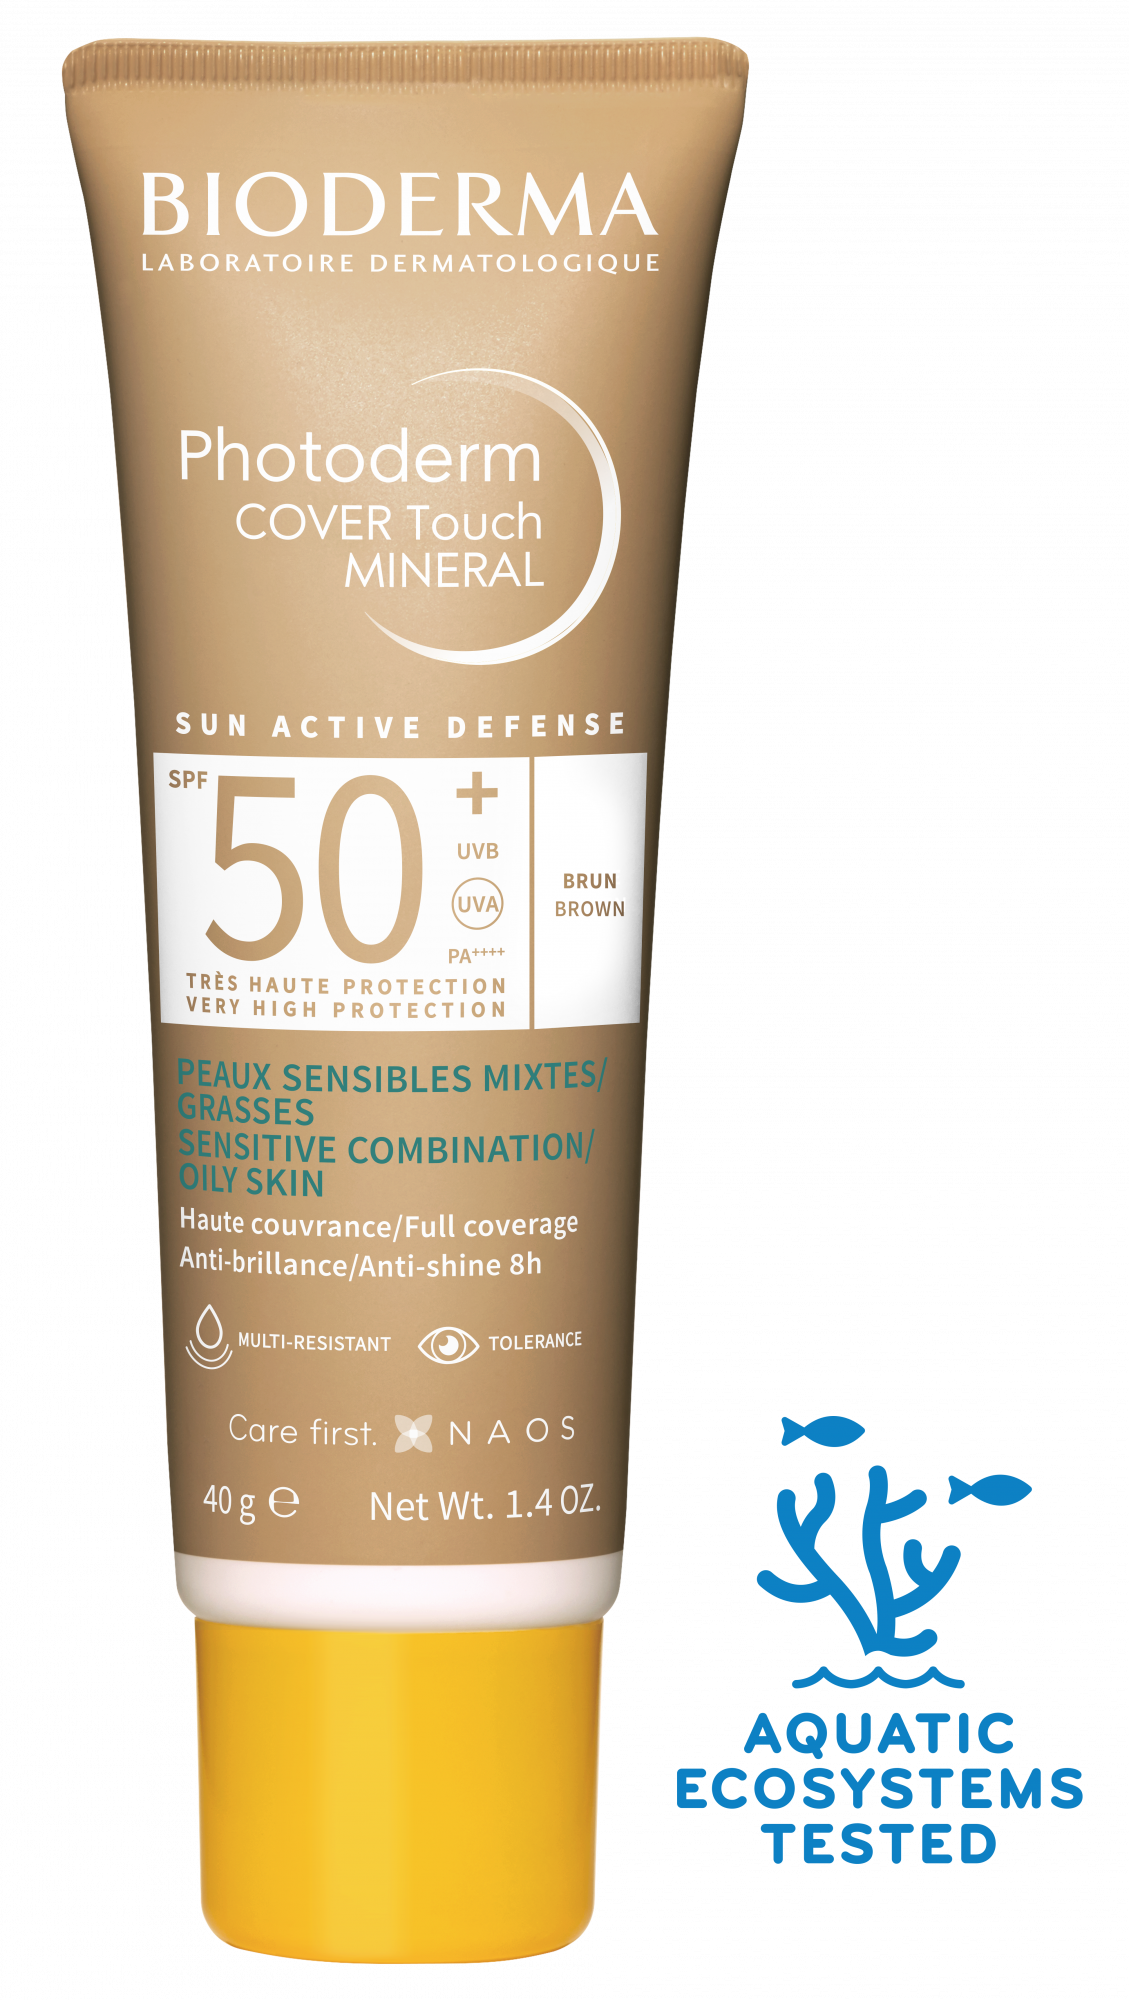 Photoderm COVER Touch SPF 50+ light